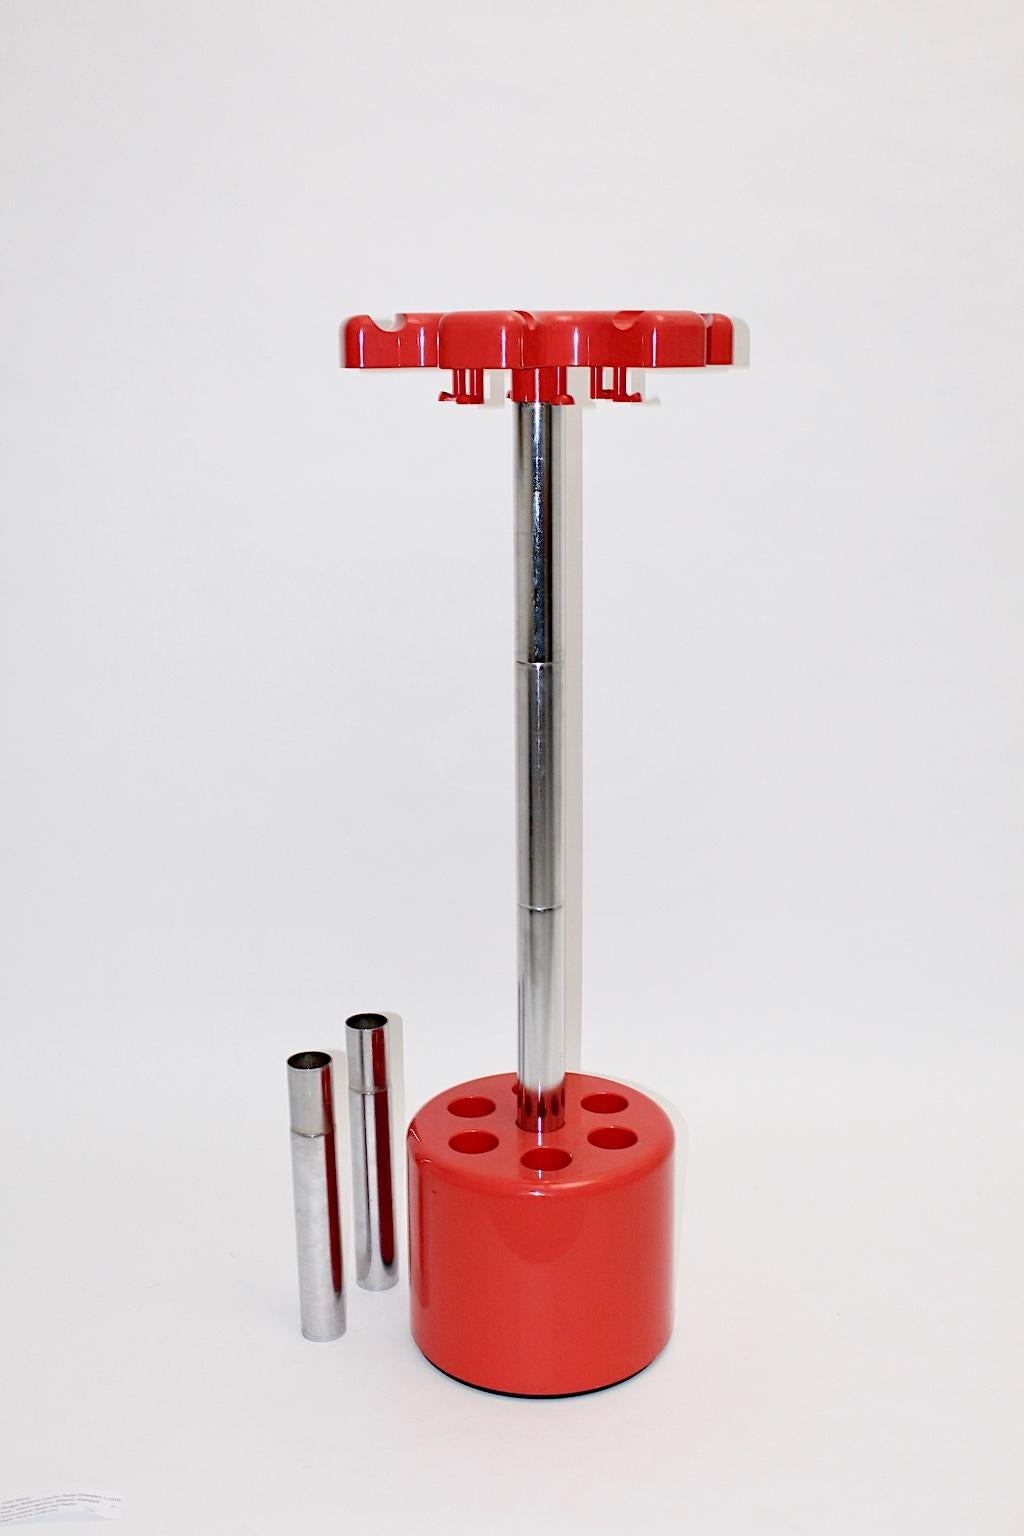 The red plastic and metal vintage coat stand was designed by Roberto Lucchi and Paolo Orlandini circa 1970 for Velca, Legnano, Milano.
The stem features parts, which are stacked one inside another - so you can adjustable the height.
The maximum